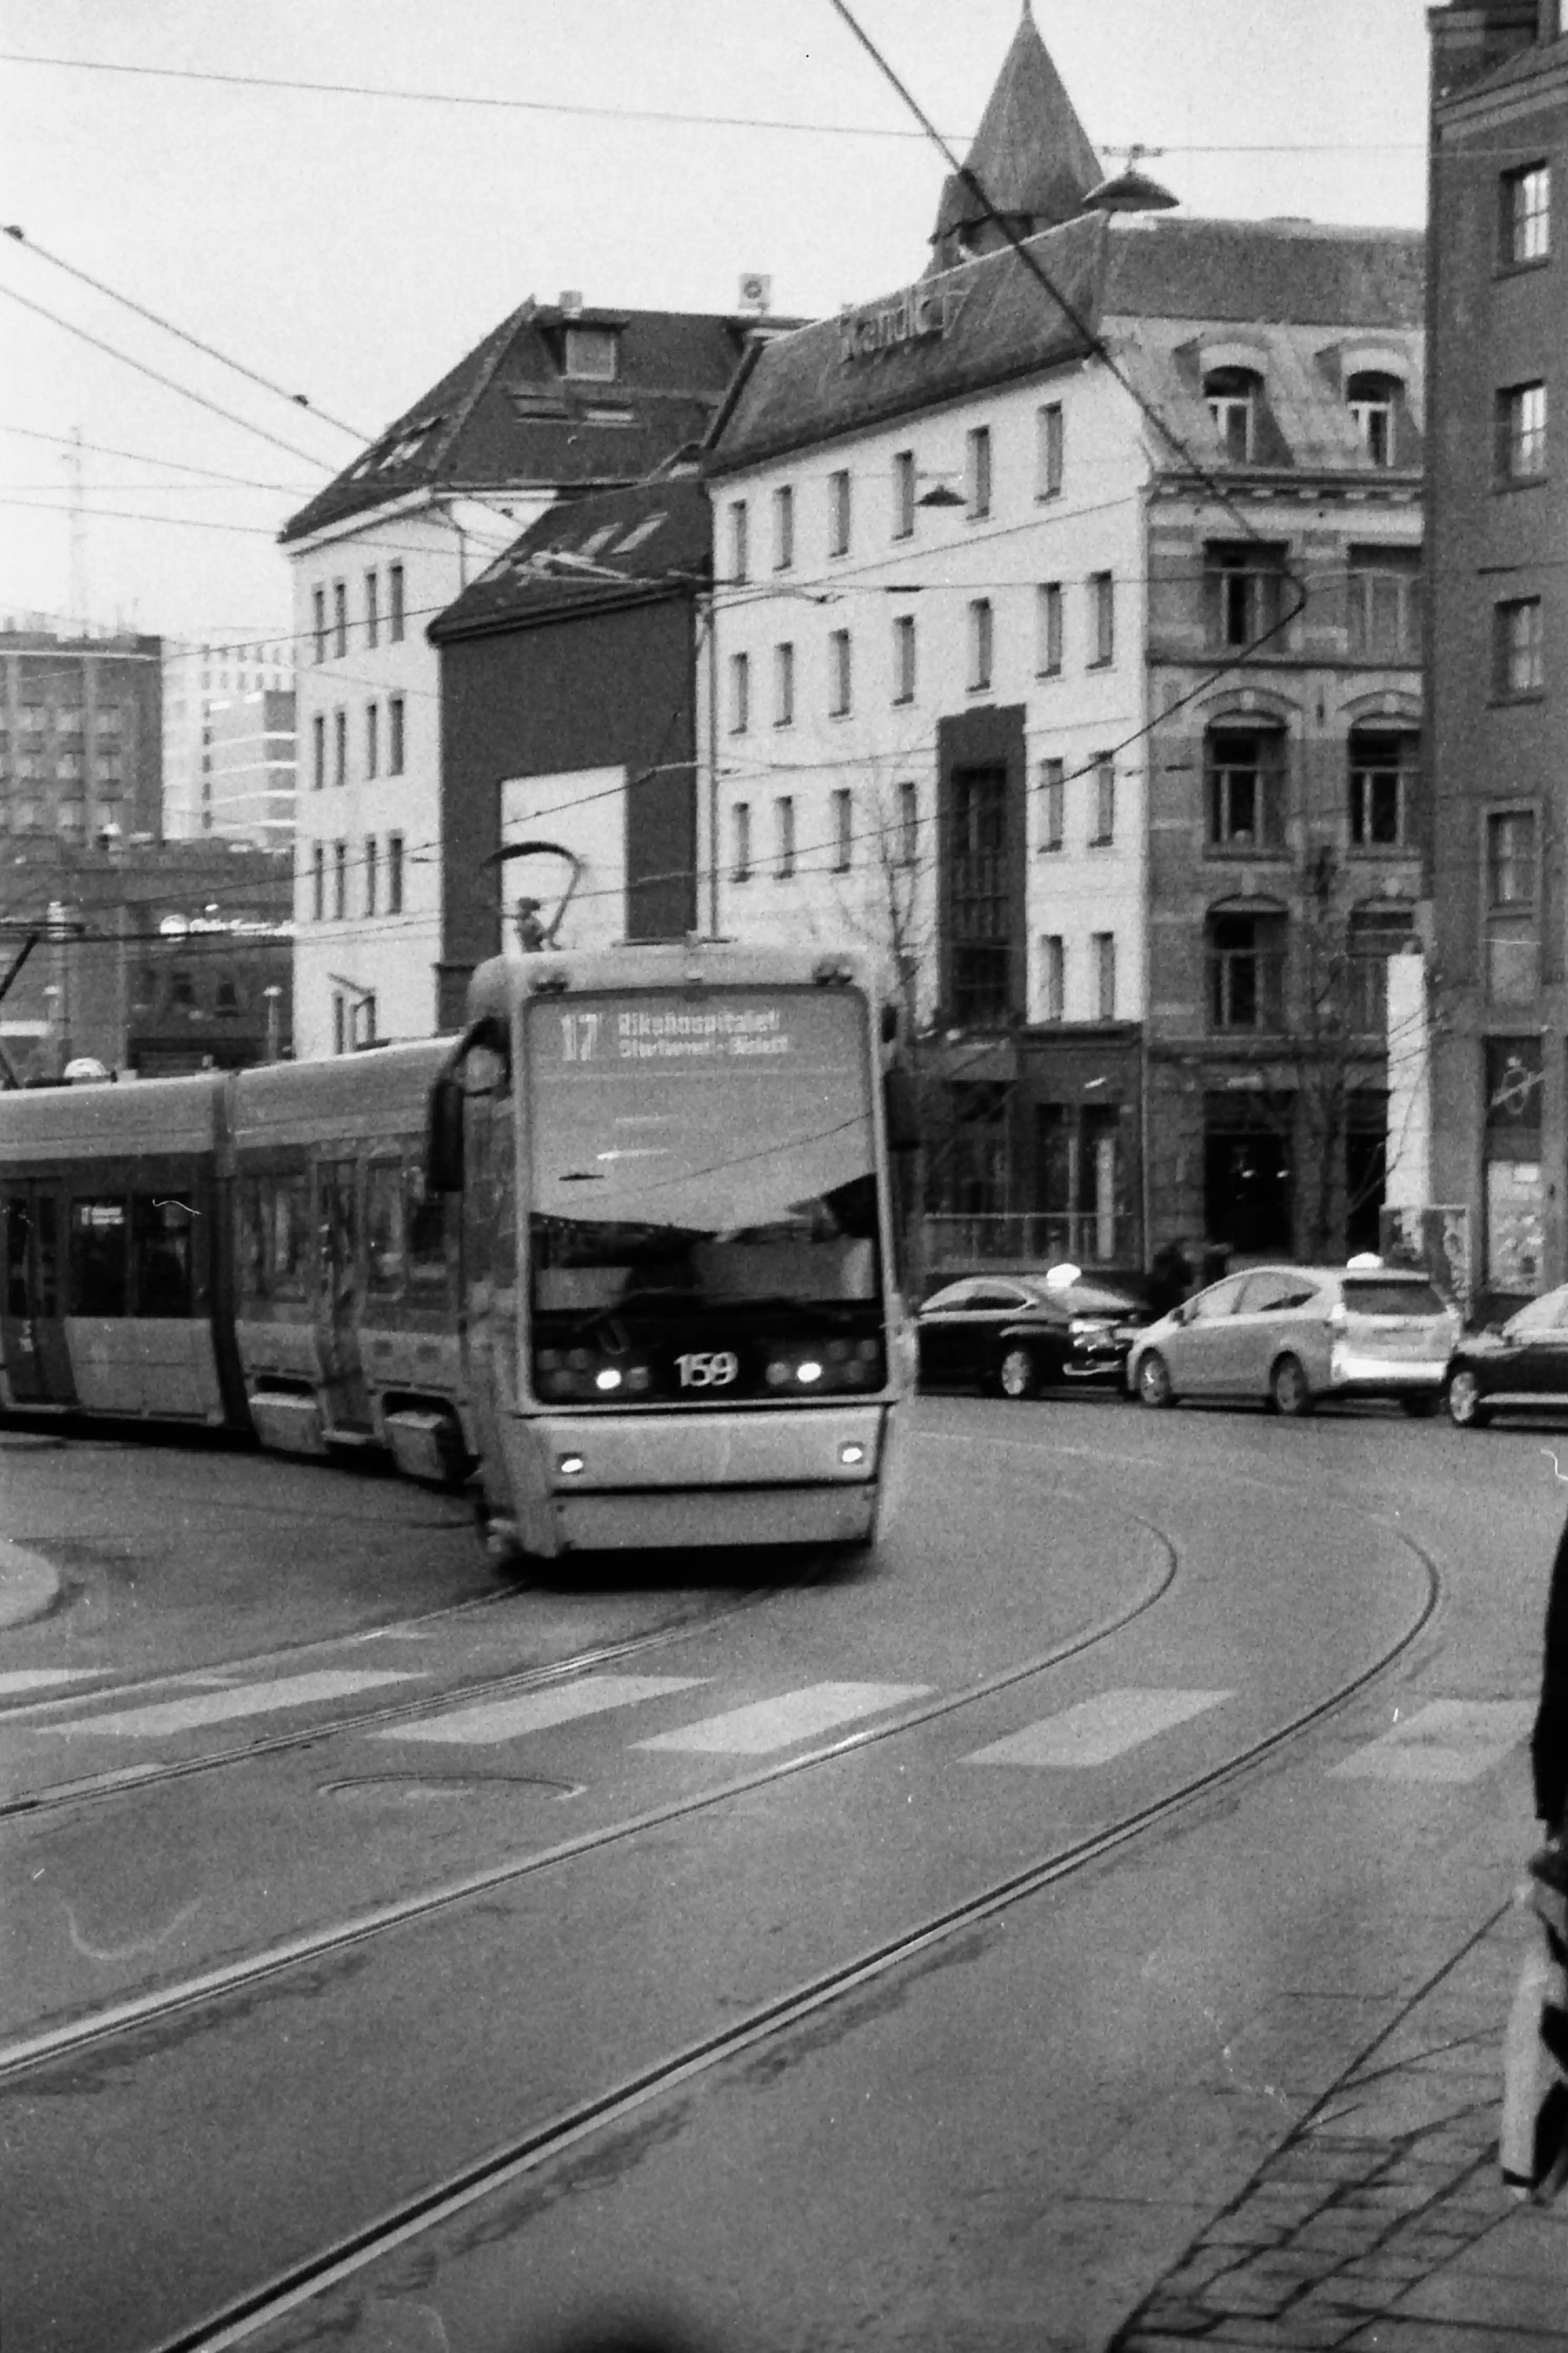 Black and white picture in portrait mode of a tram in the street. It shows on its screen that it’s line number 17 to Rikshospitalet